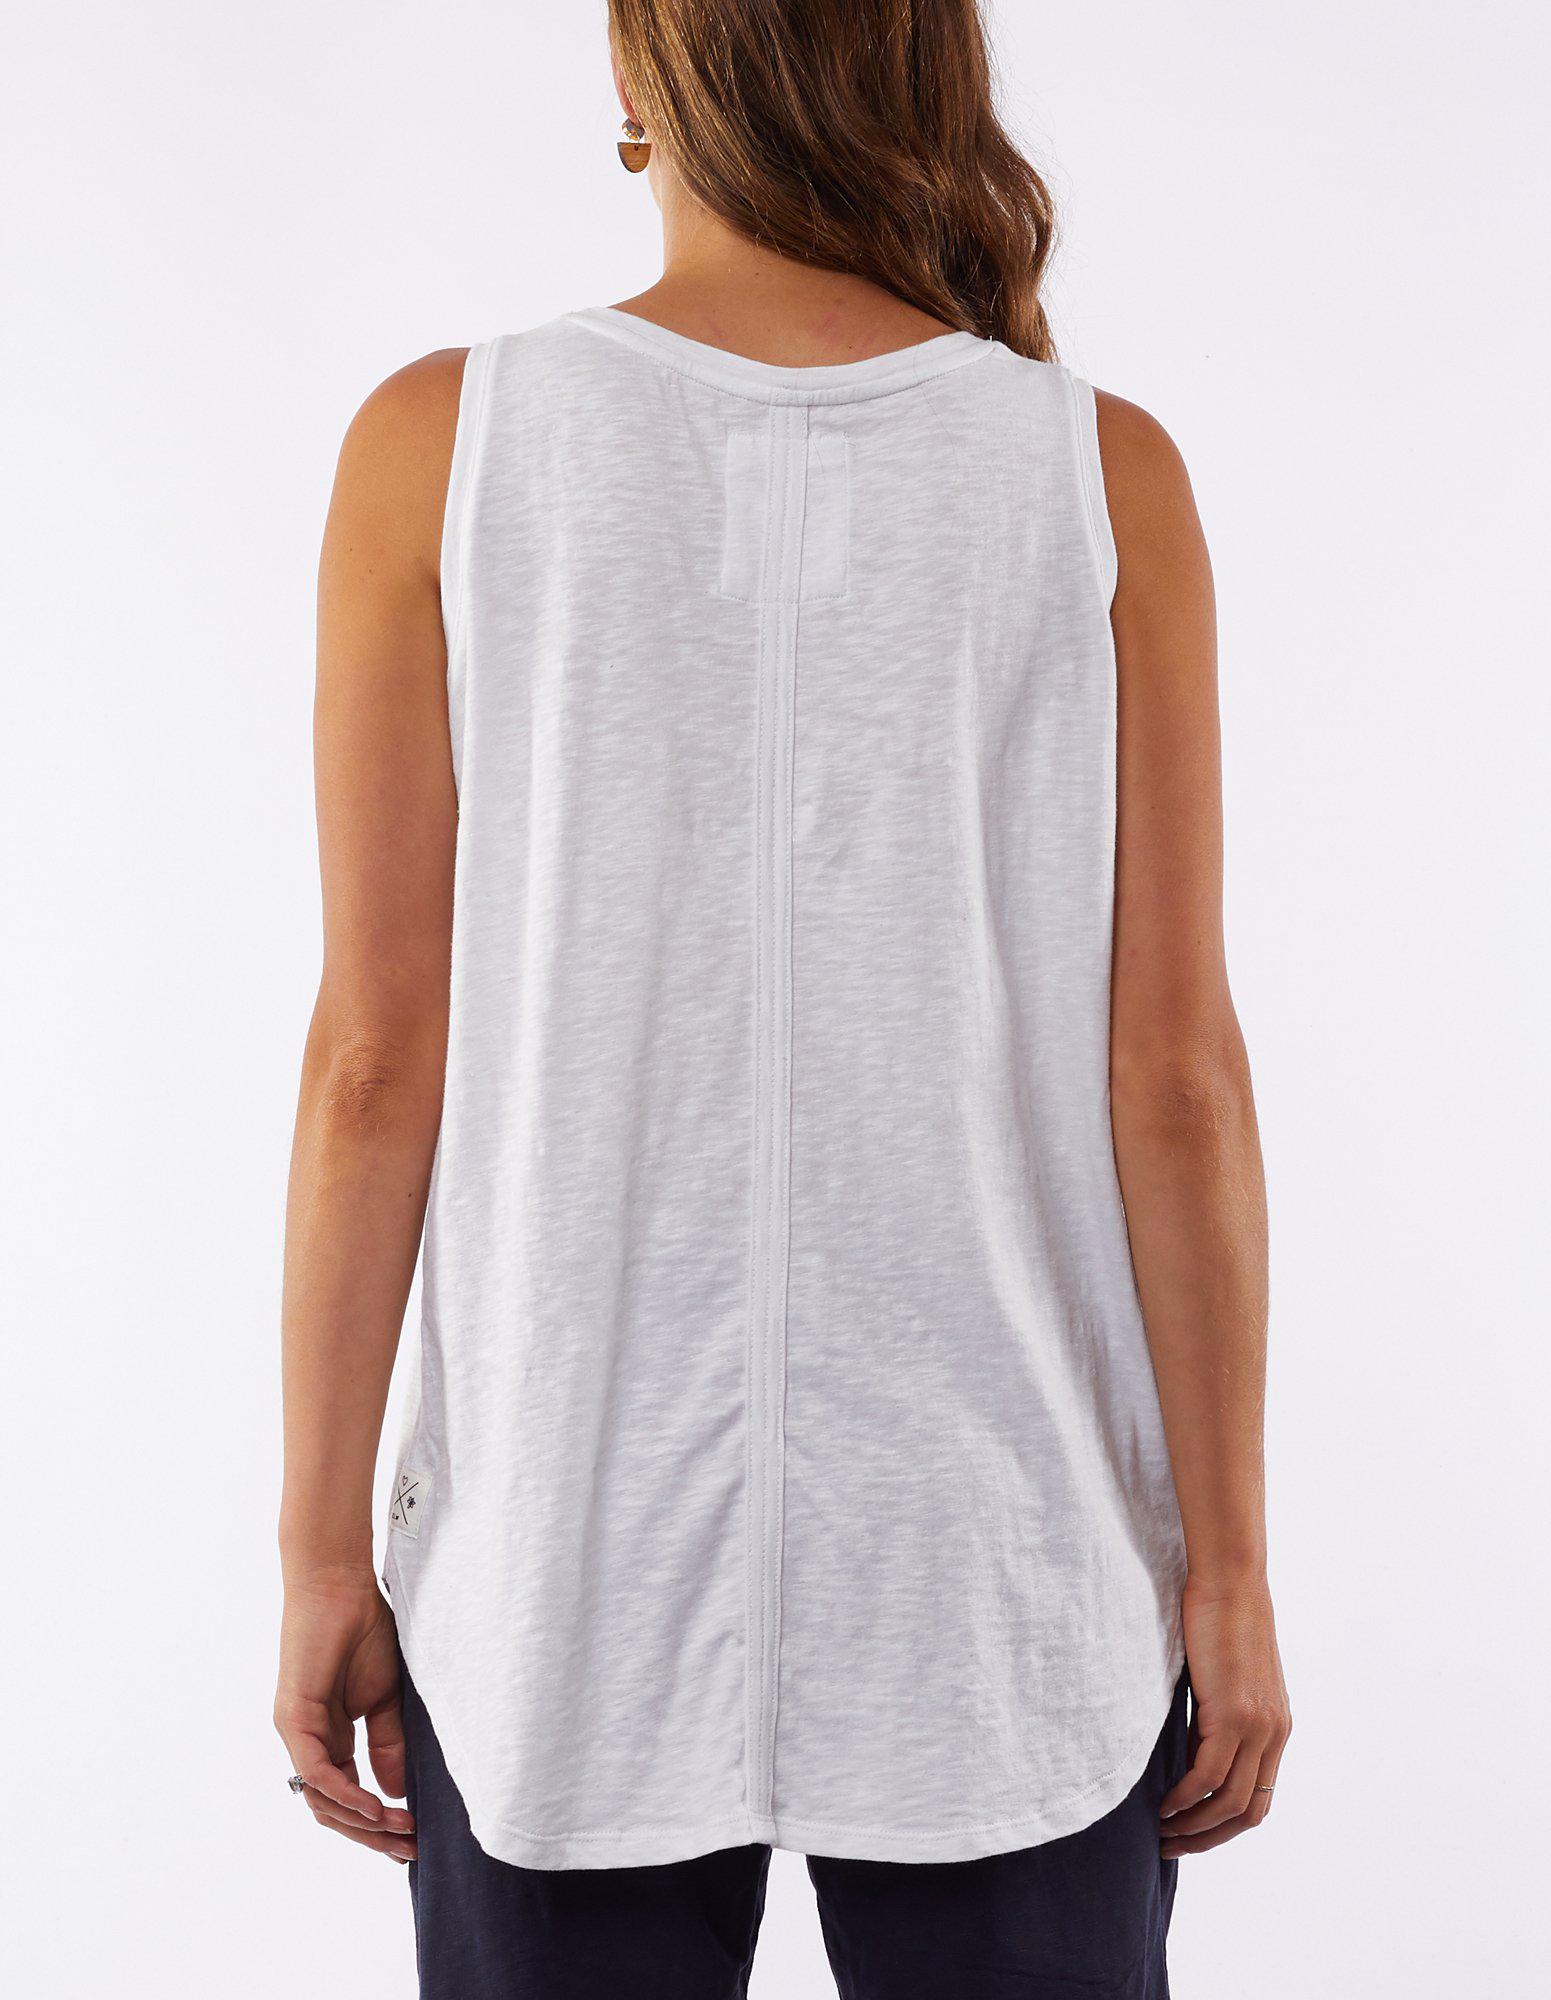 Scoop Tank - White - Elm Lifestyle - FUDGE Gifts Home Lifestyle